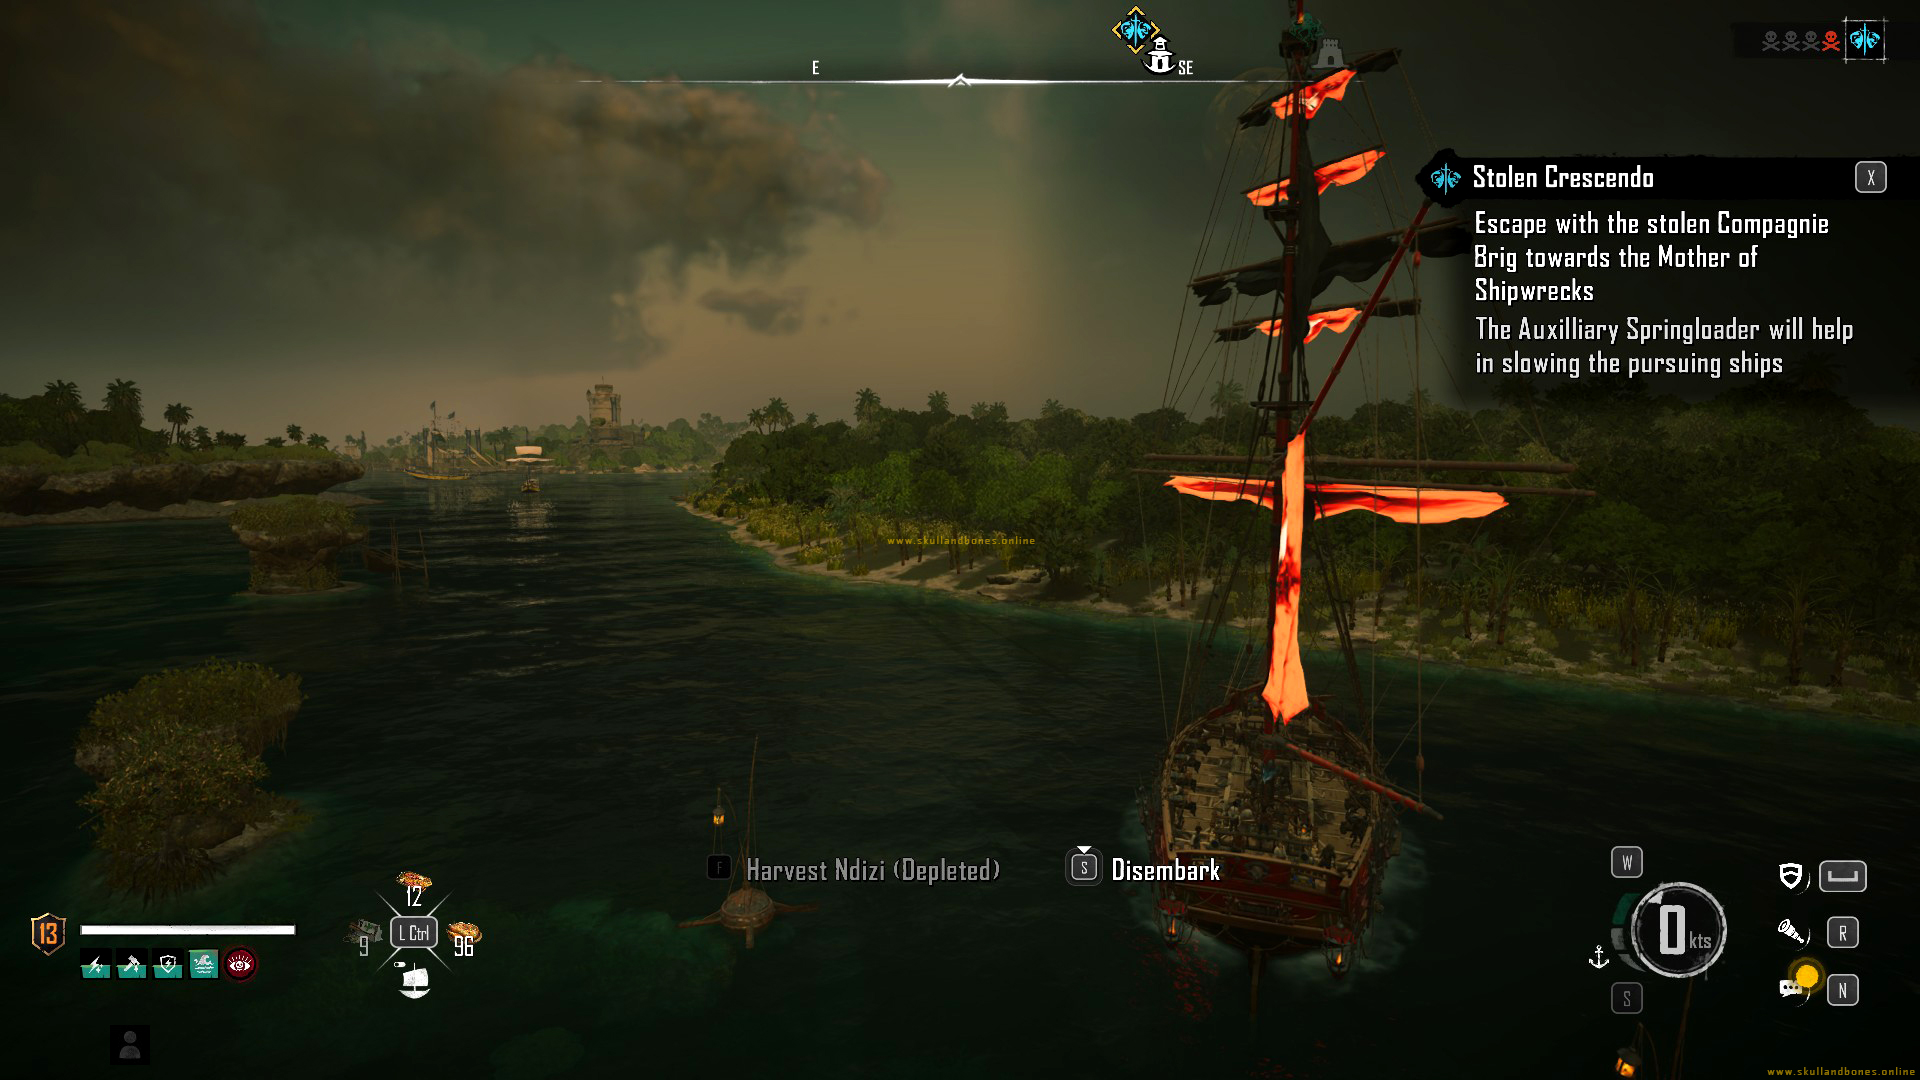 Skull and Bones – Quest – Stolen Crescendo - 7. Swap your Dhow to your main ship